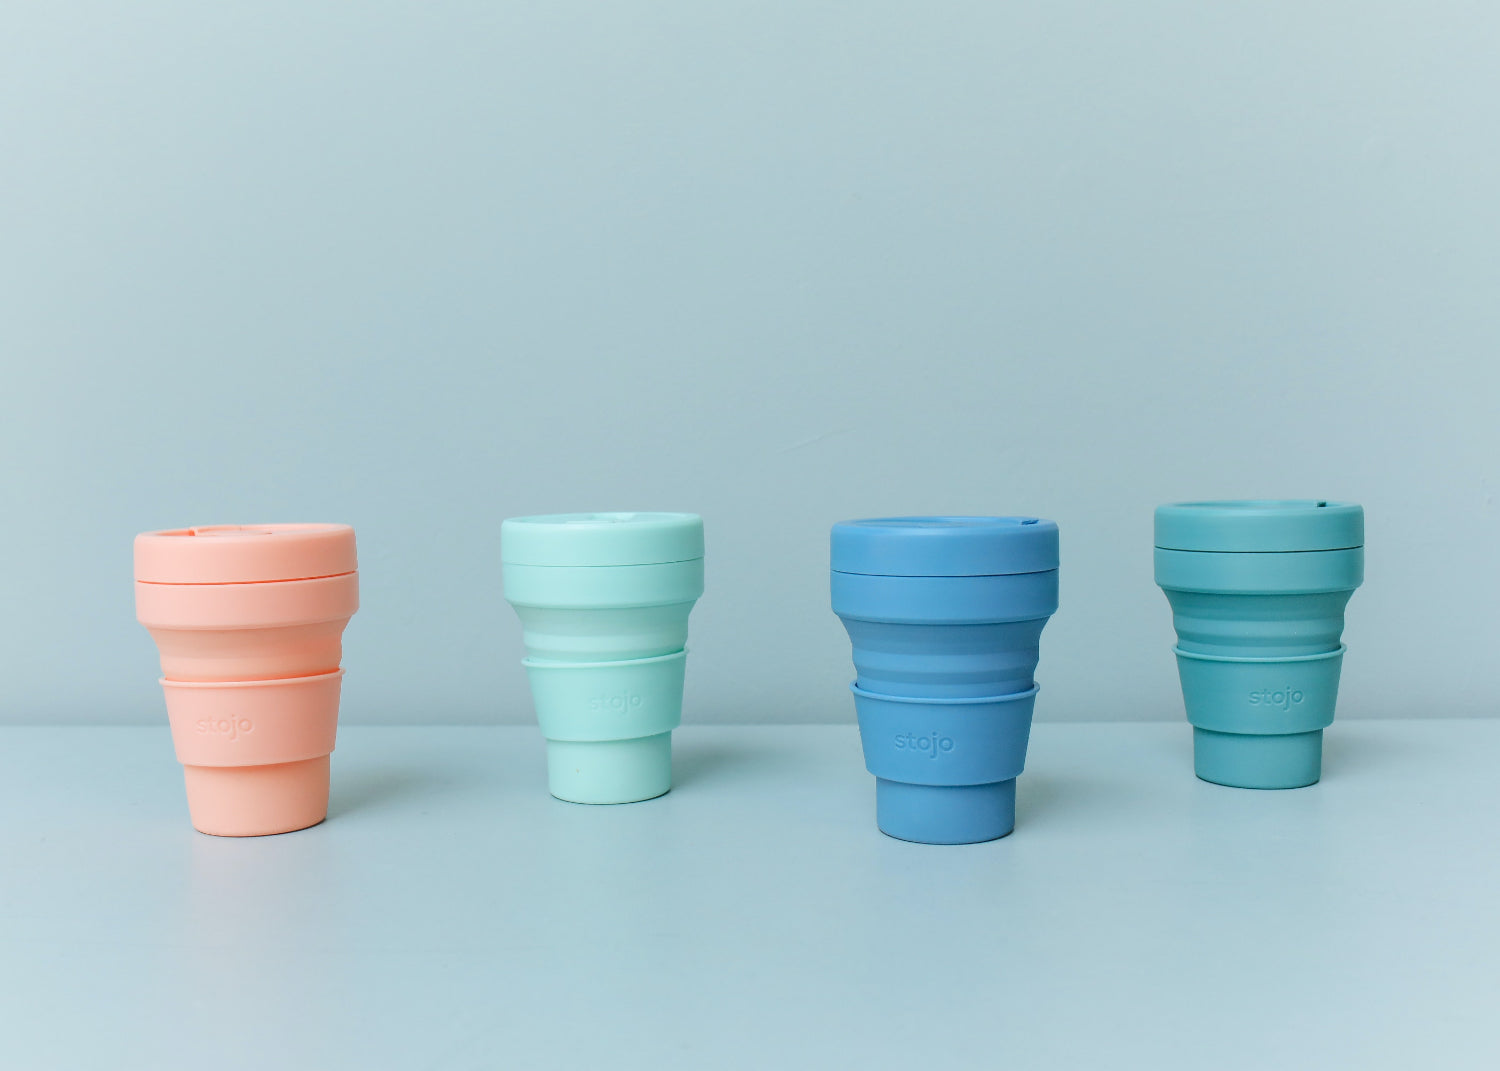 Four silicone coffee mugs in a row